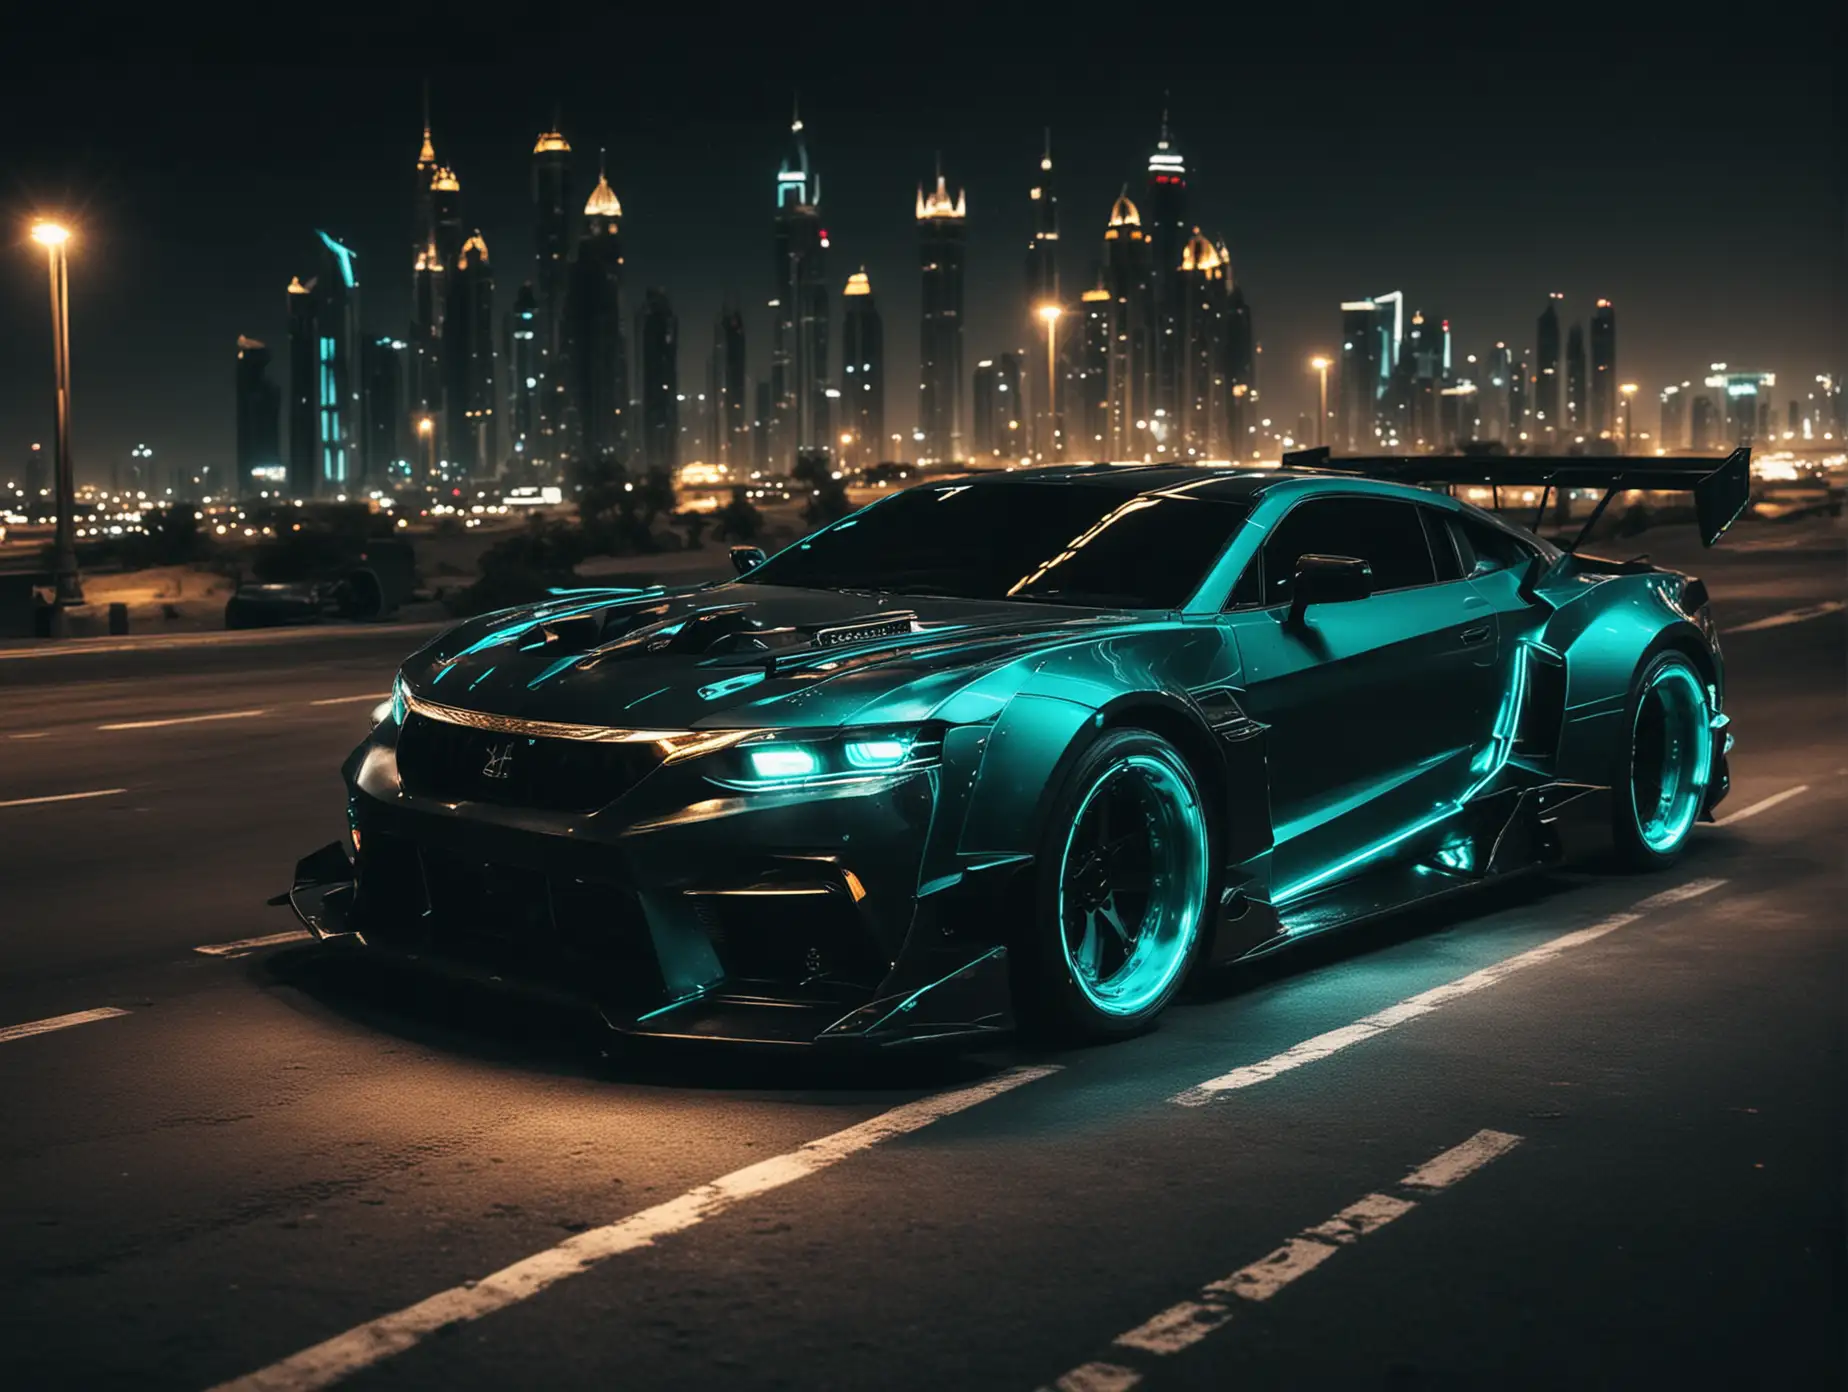 Create  futuristic  cars from dark angel, evil tuning type, Downhill in the city of dubai drifting at night rear view from high far away,  car color dark black, dark turquoise  and violent car lights.